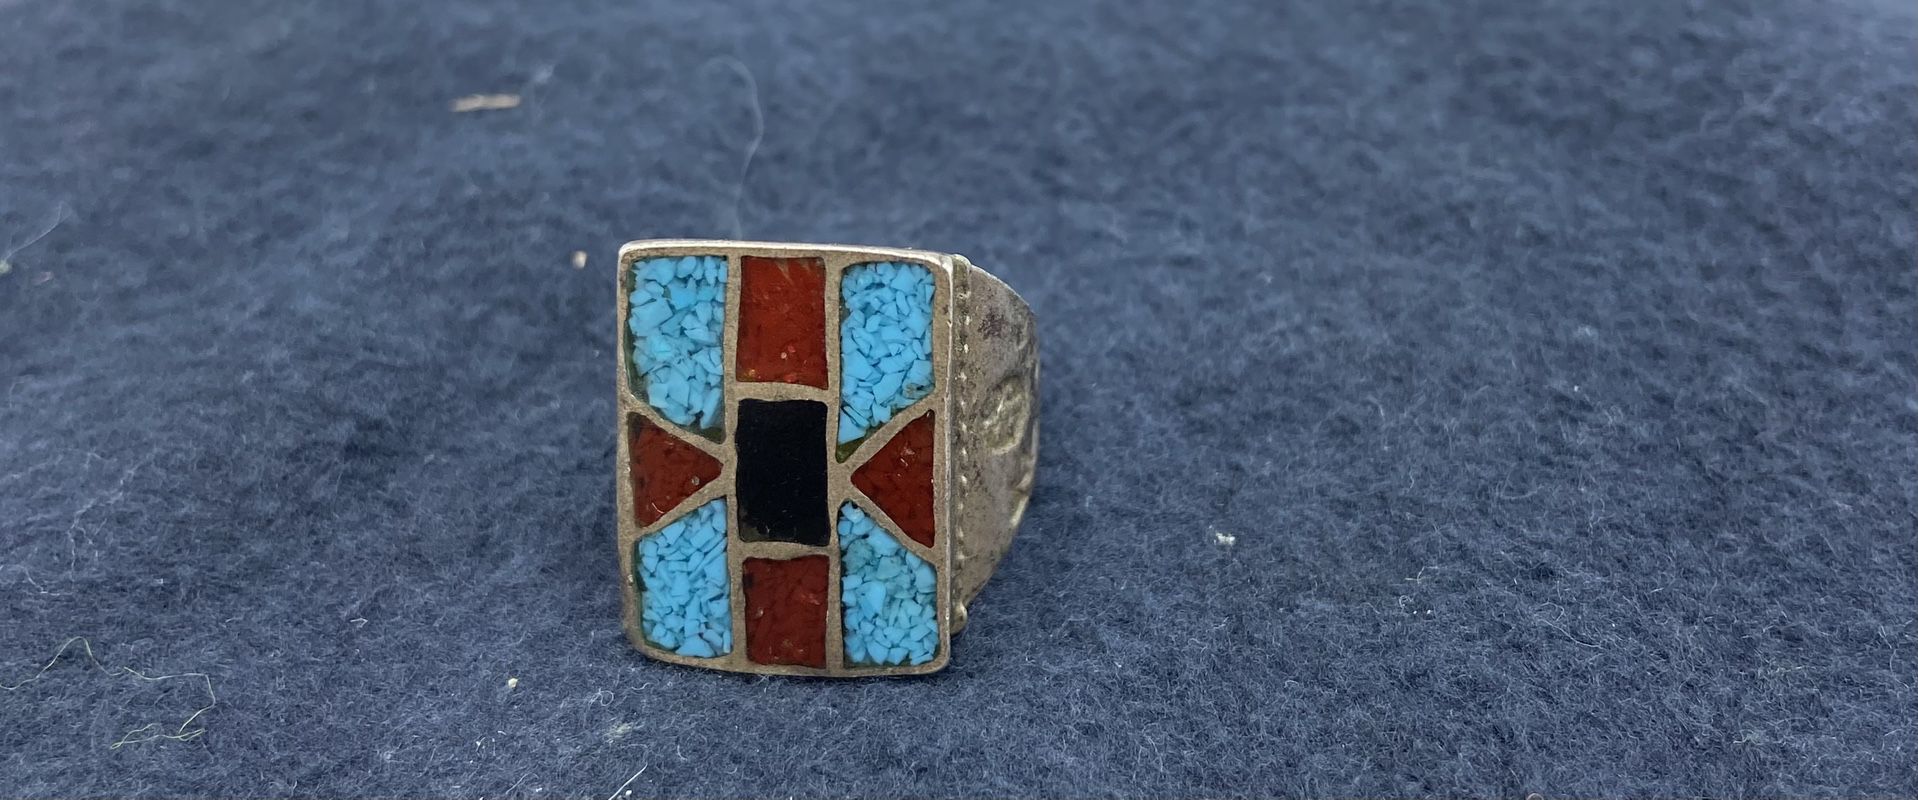 VTG MEN’S  TURQUOISE AND CORAL STERLING RING SIZE 9.5